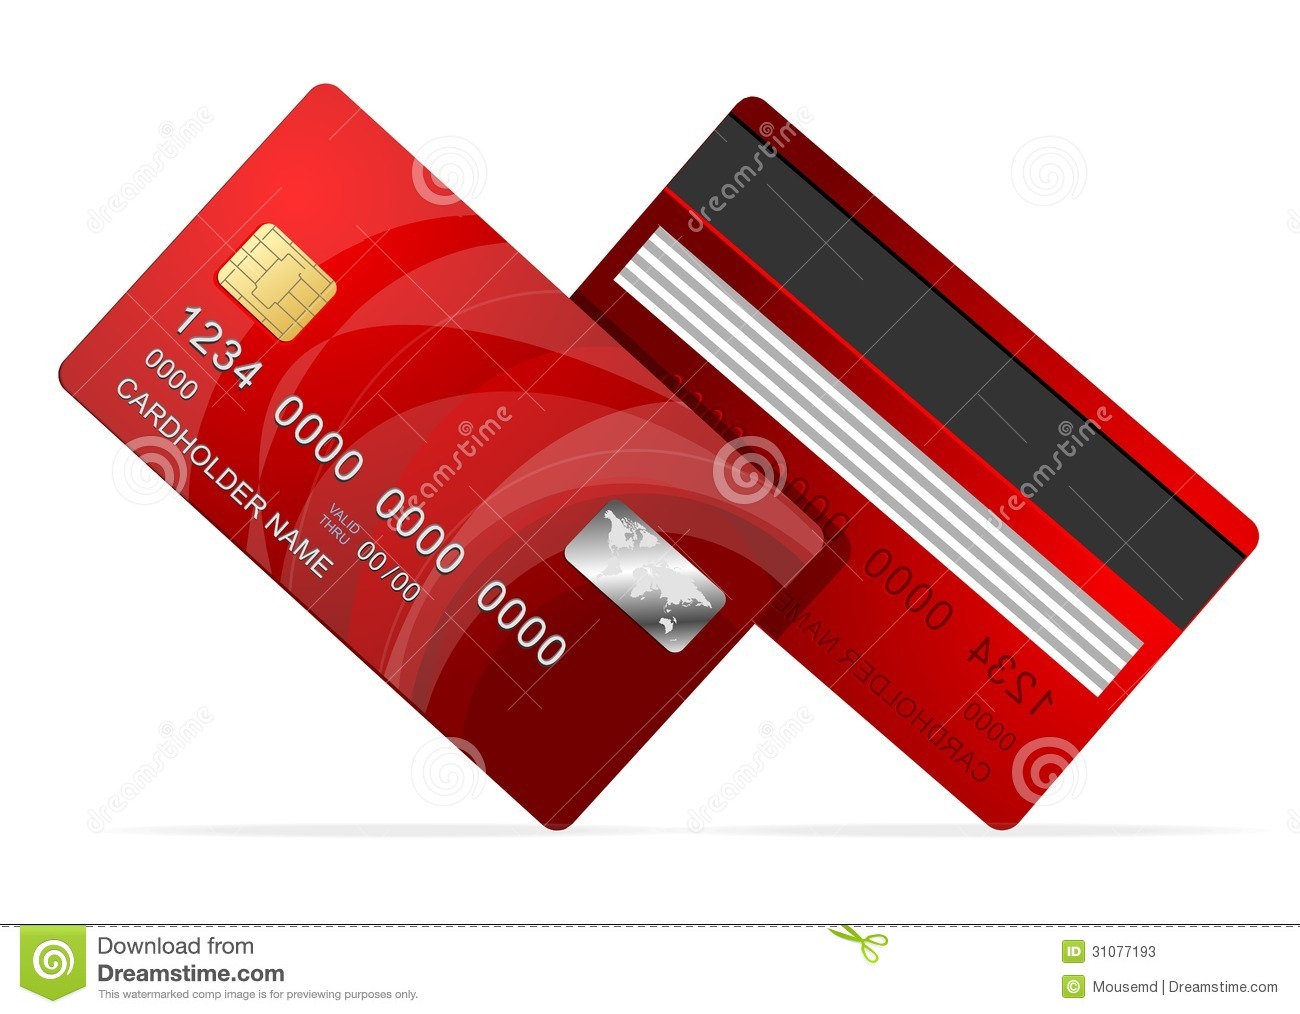 Credit Card Icons Vector